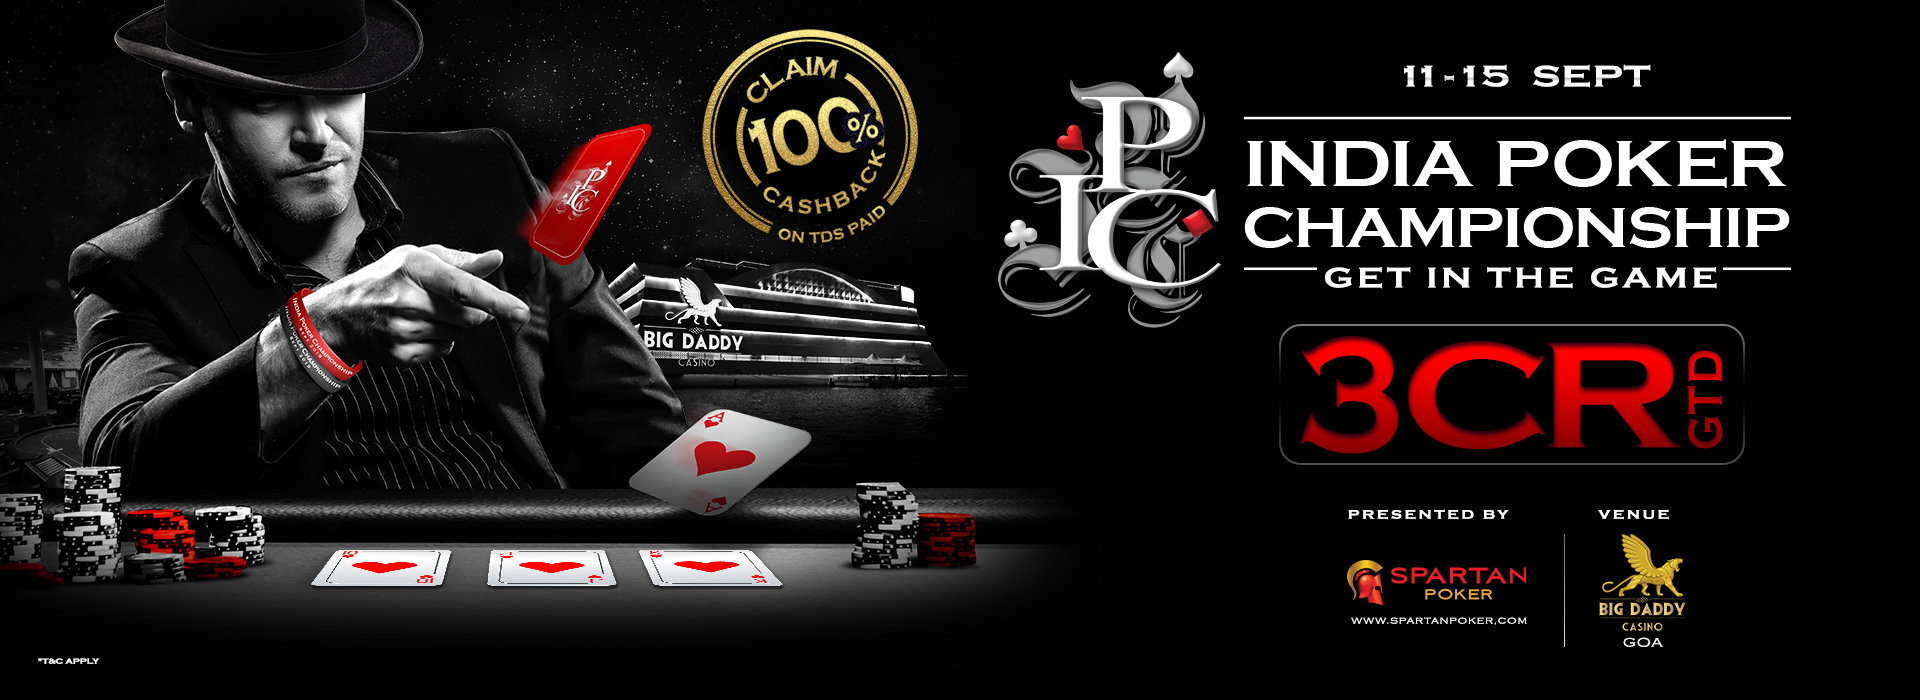 India Poker Championship Another Beacon of Hope for Local Players